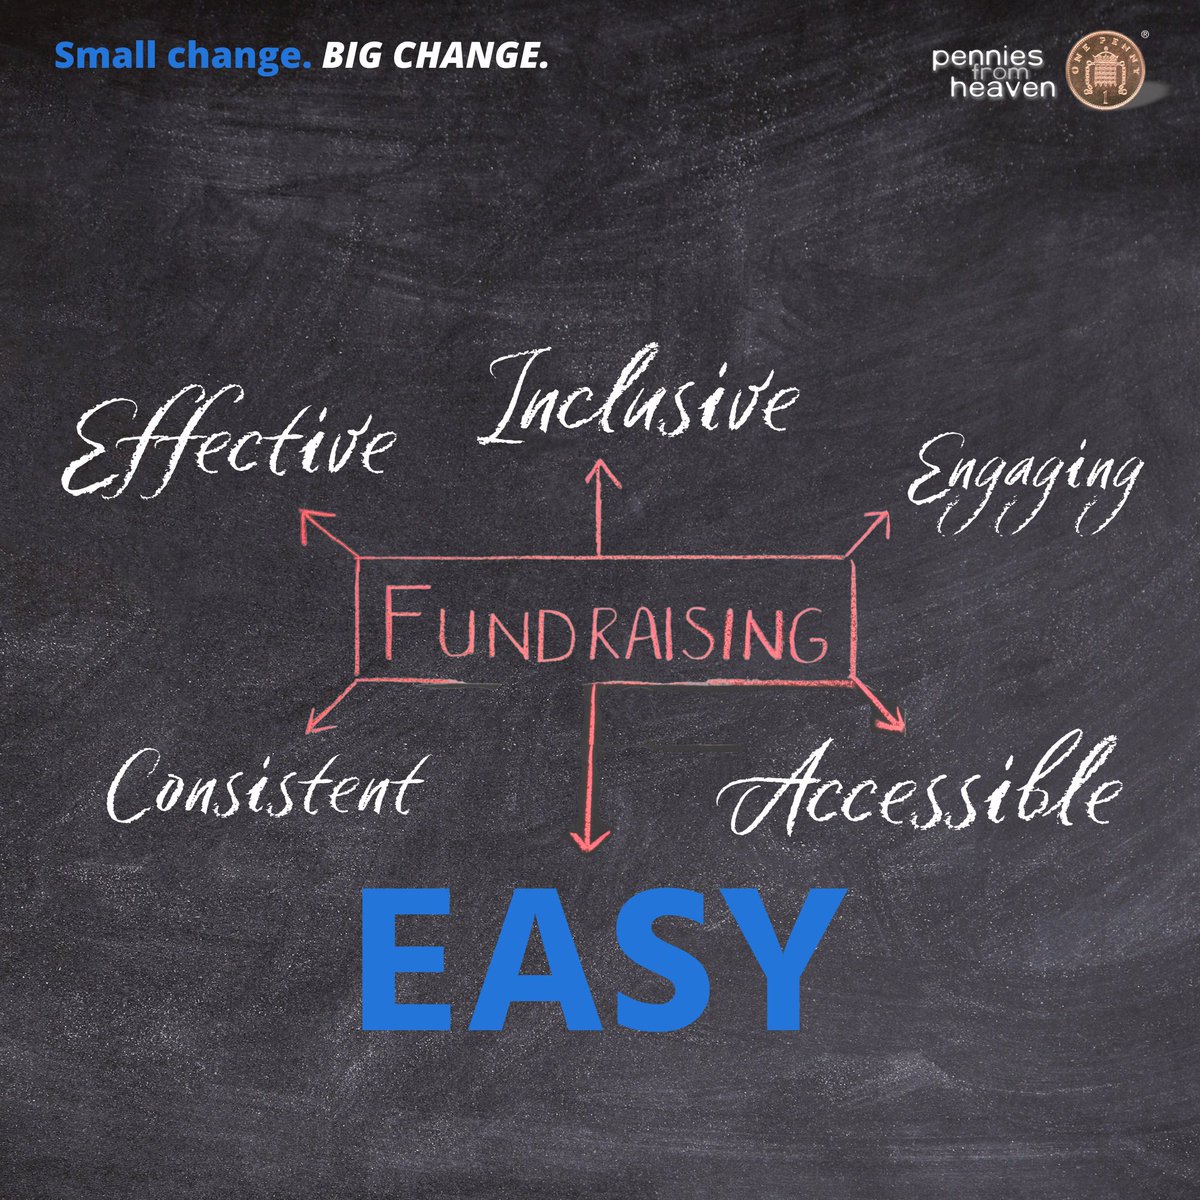 What are you looking for in a fundraising solution? Research has shown that the top of the list is a solution that is 𝘌𝘈𝘚𝘠. Thankfully @payslippennies is just that. EASY to set up EASY to run EASY to promote EASY to participate with #FundraisingMadeEasy #GivingPennies